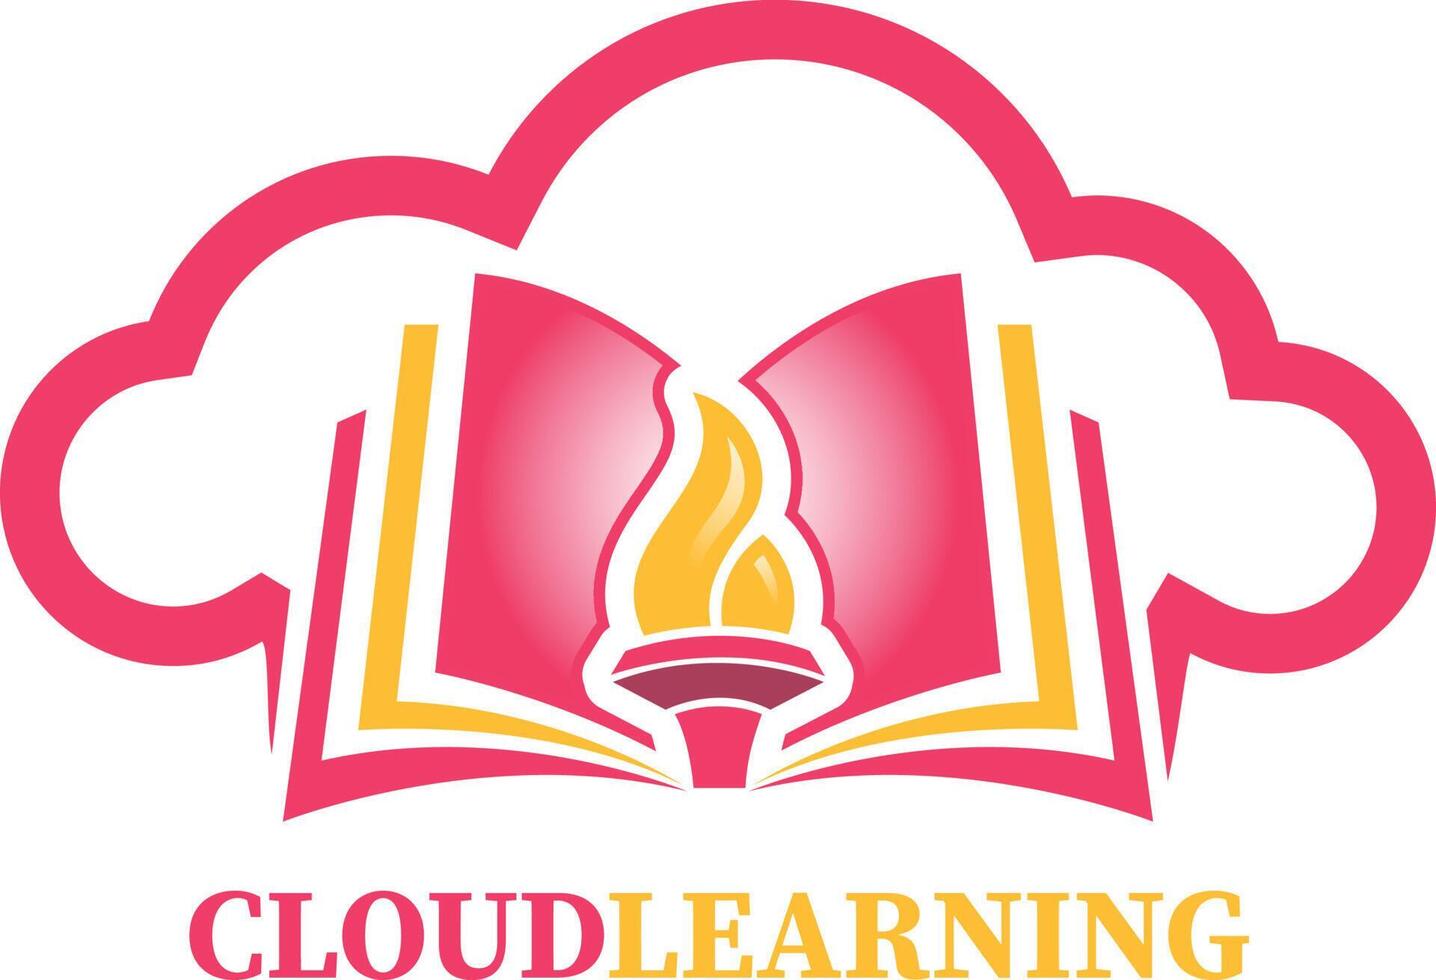 Online education logo concept. Torch and cloud icon. Publisher and creator logo template. vector